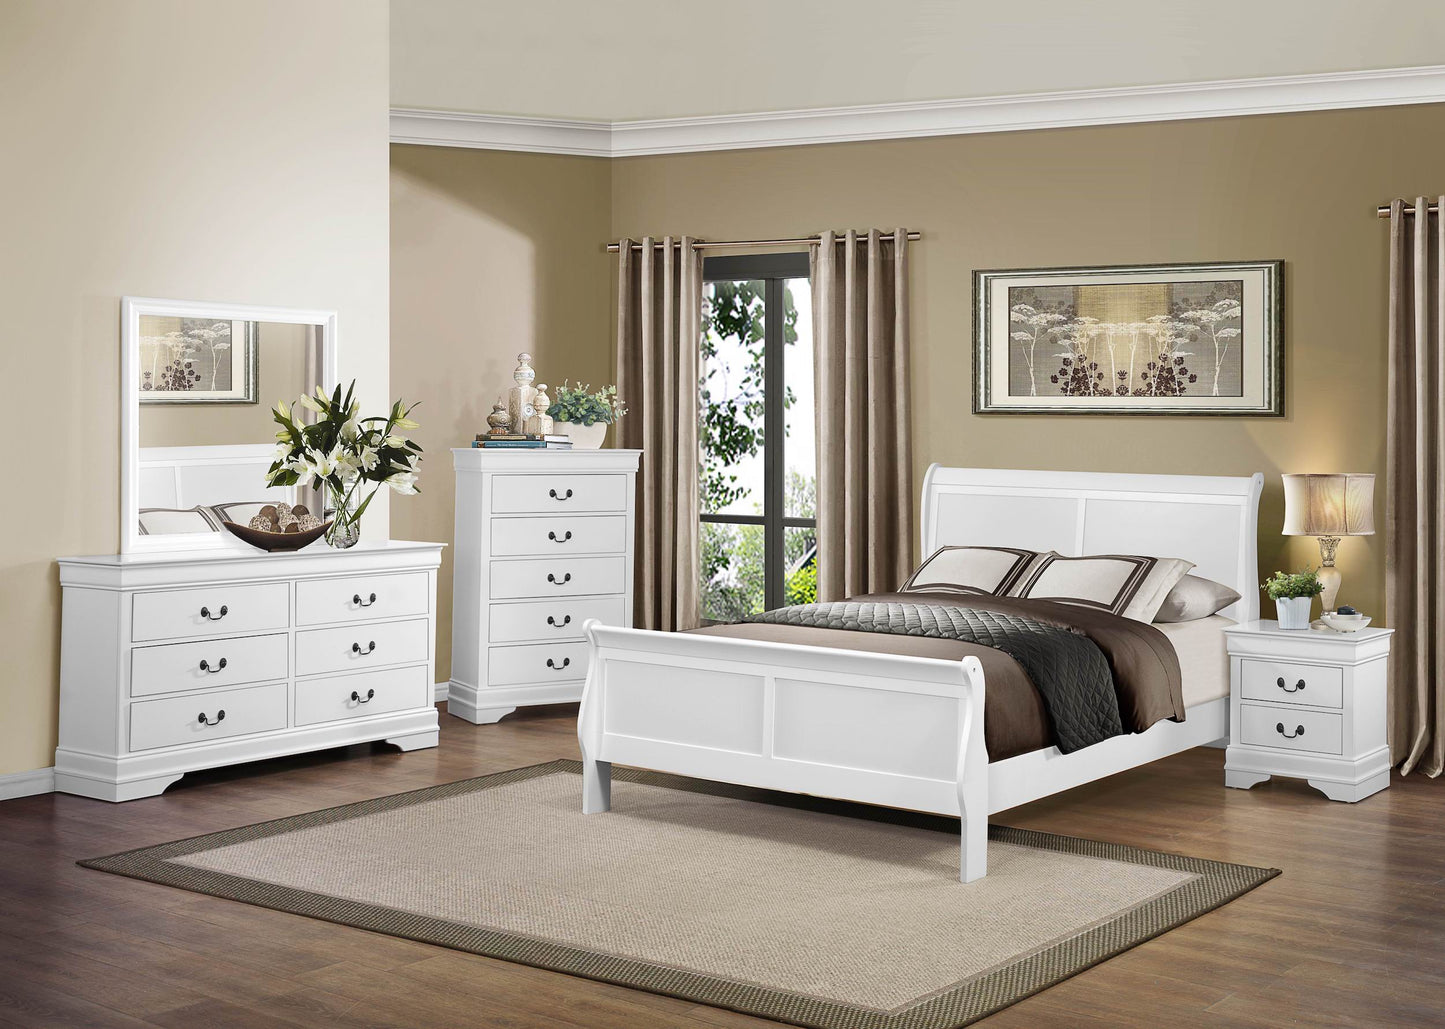 Manburg Louis Philippe 5PC Bedroom Set Cal King Sleigh Bed, Dresser, Mirror, Nightstand, Chest in Burnished White